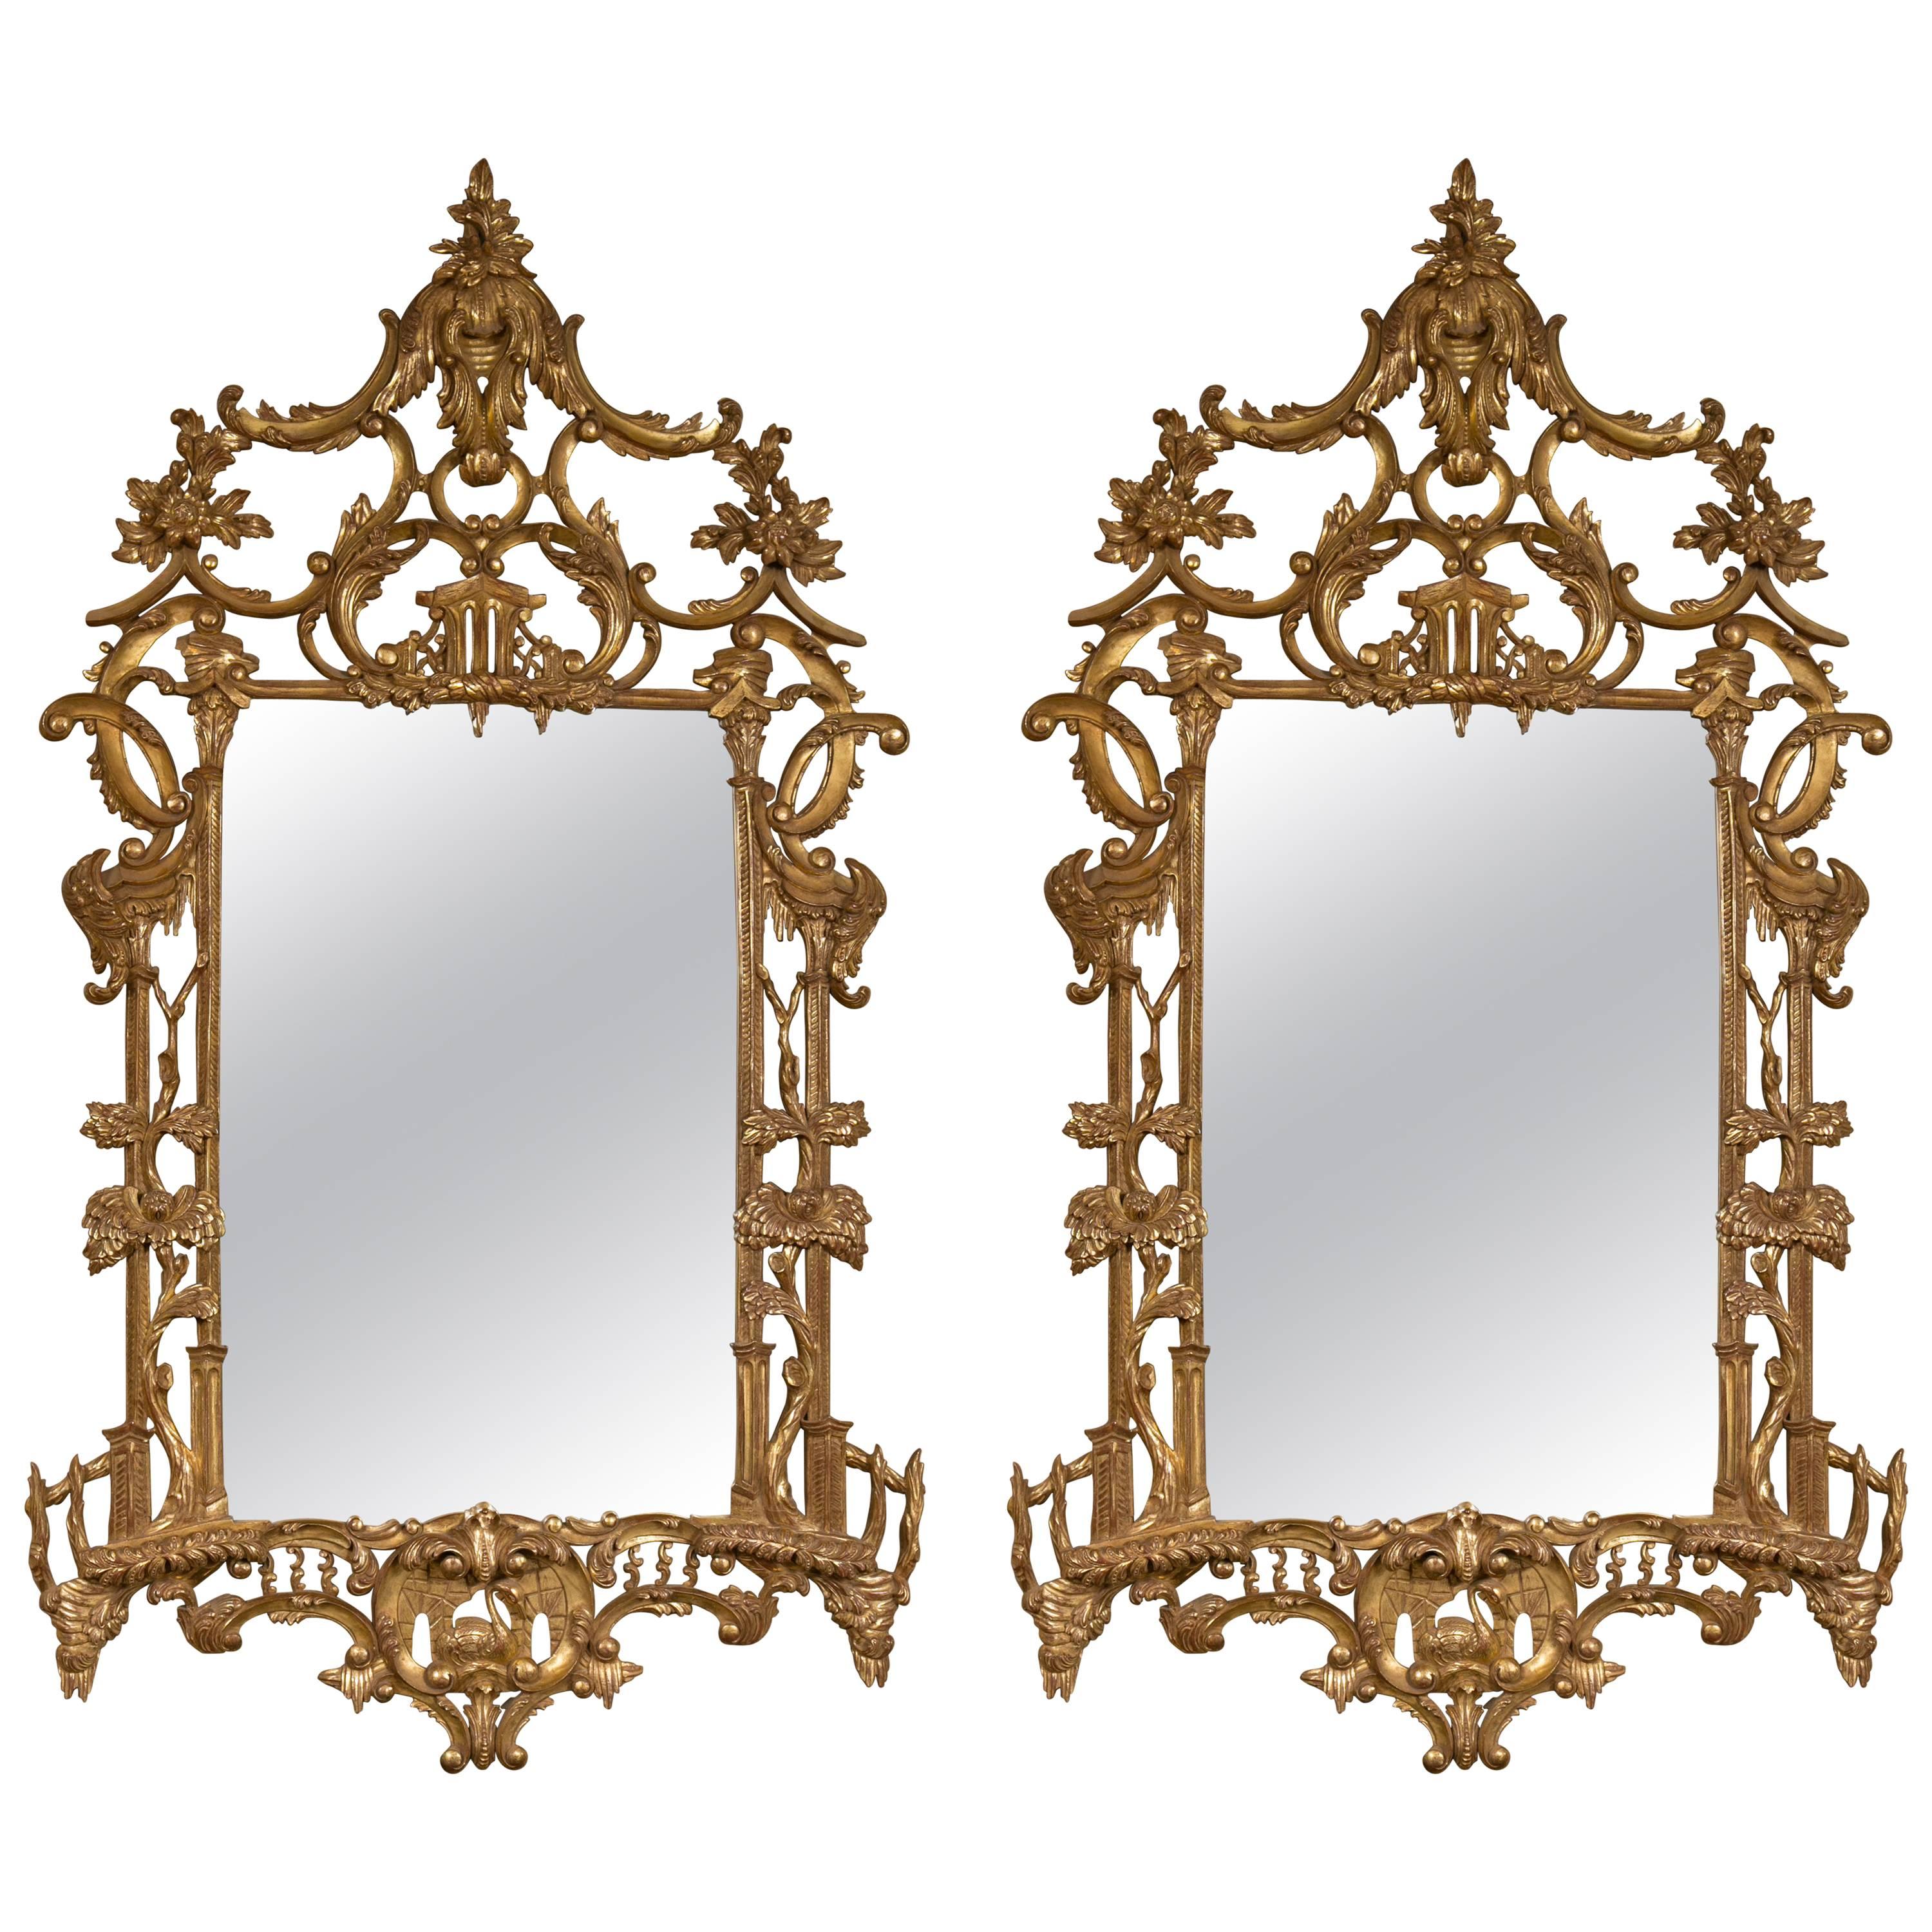 Pair of Italian Gilt Gold Chinese Chippendale Style Wooden Wall Mirrors